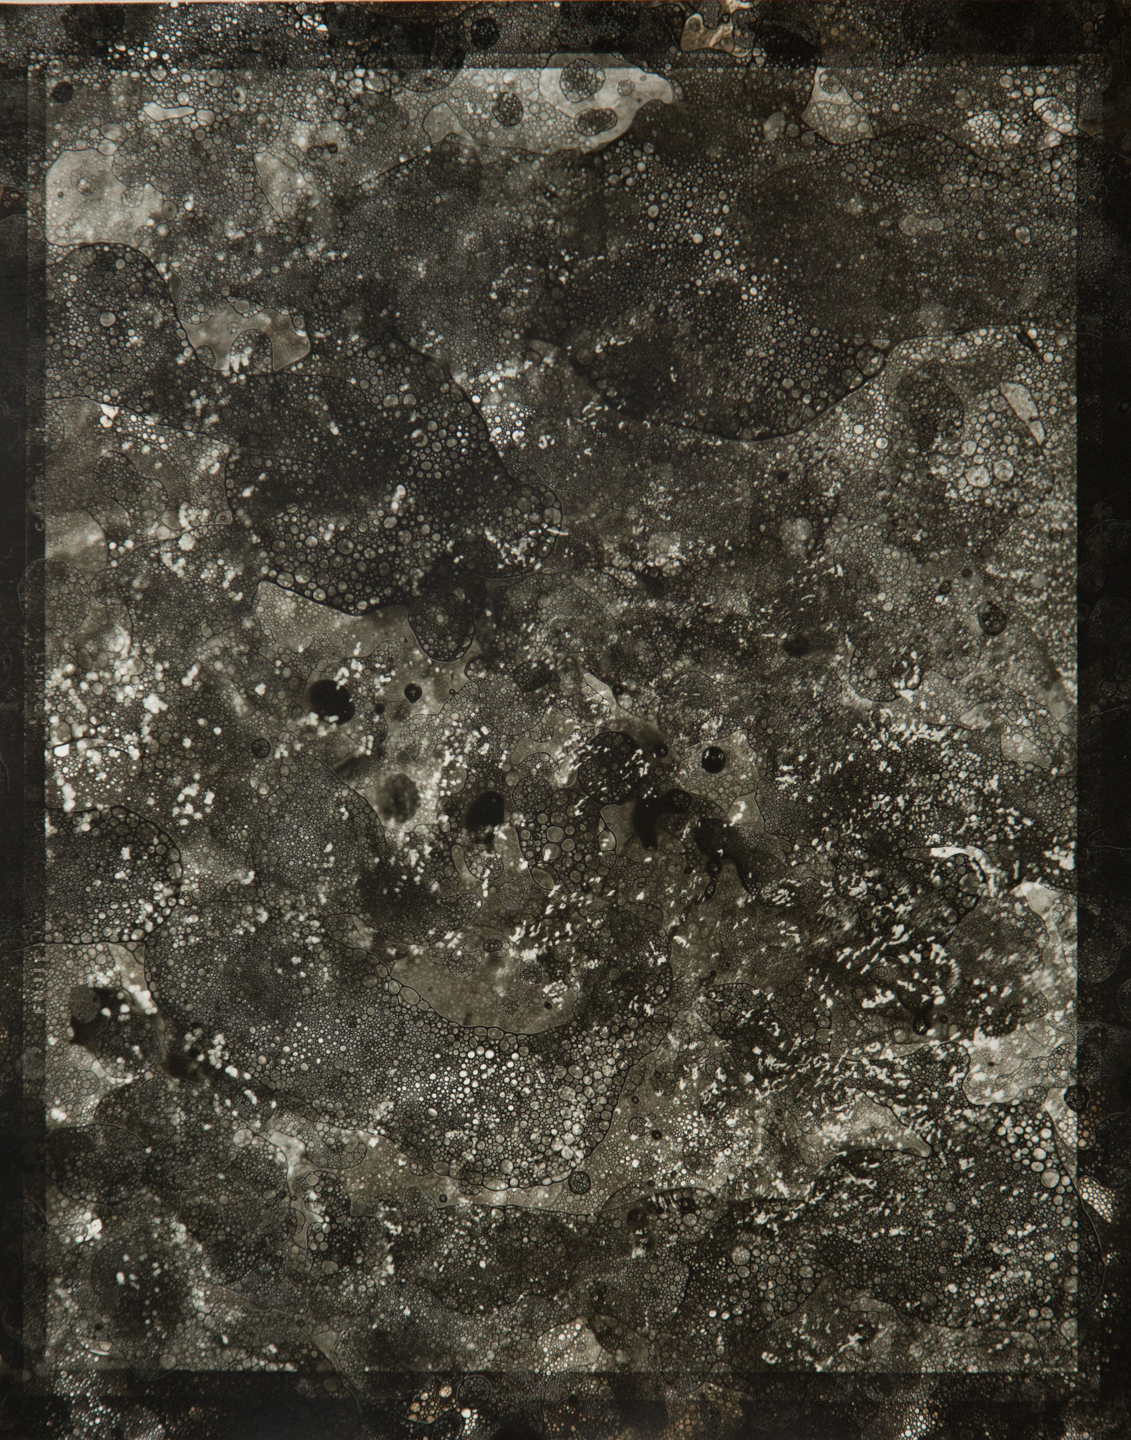 Ocean Abstraction 5.26.2016, Unique Silver Gelatin Print, 14 x 11 inches